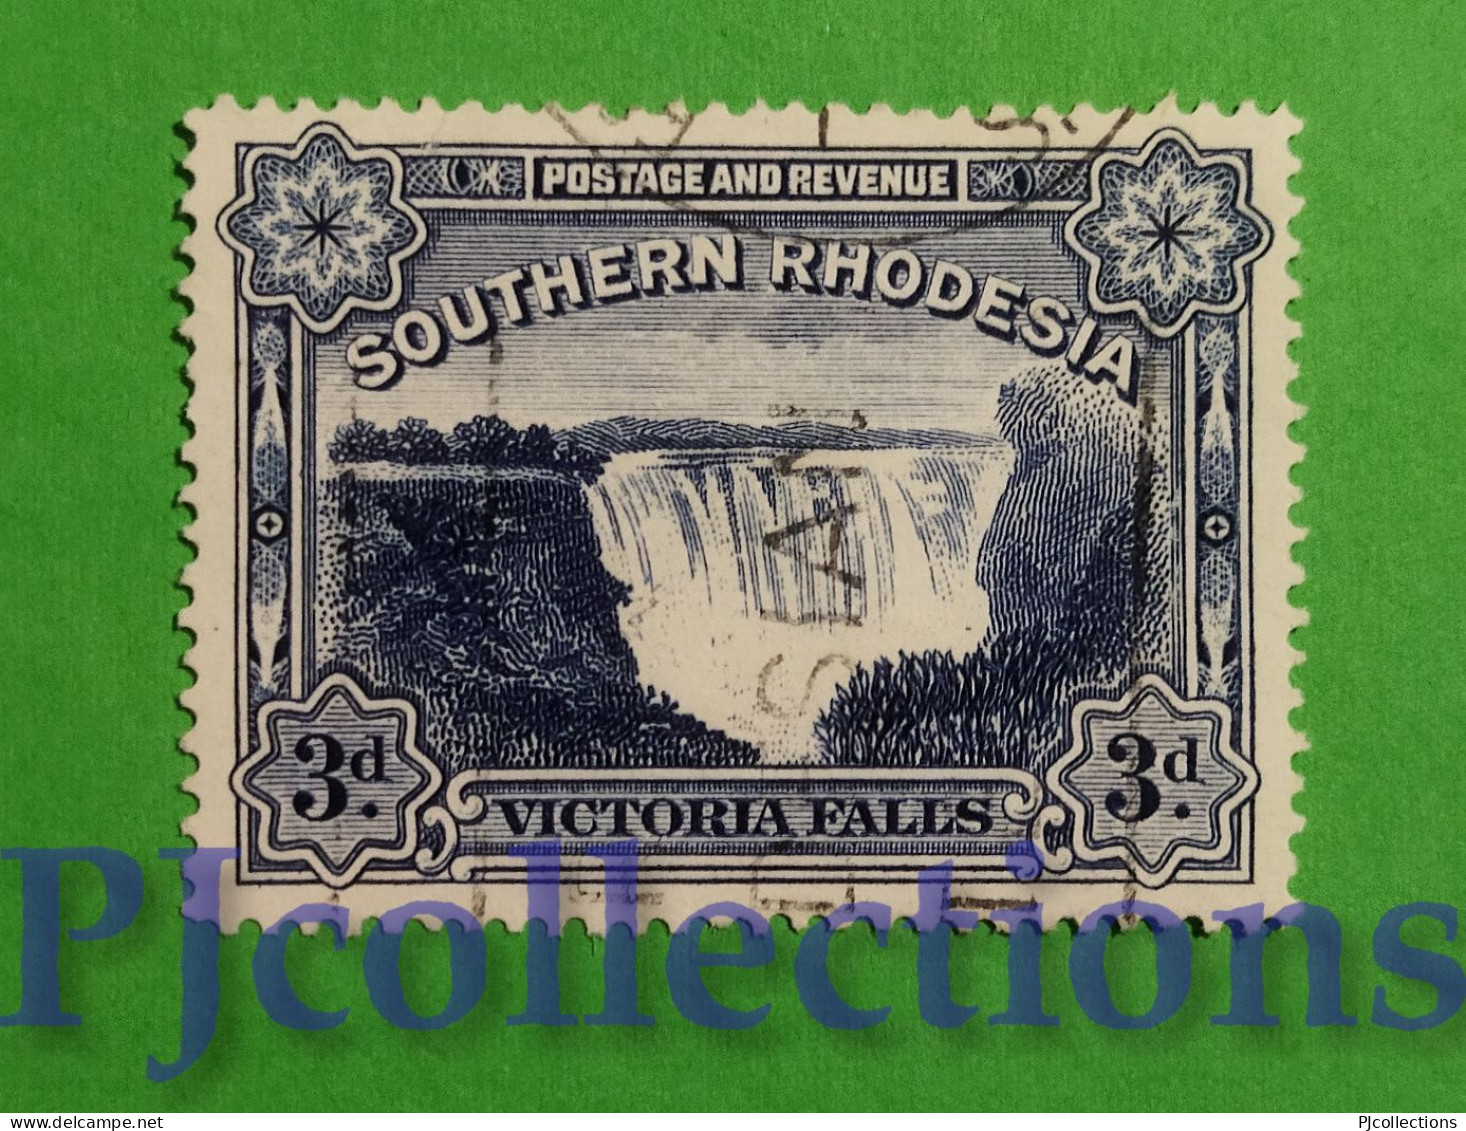 S767- SOUTHERN RHODESIA 1935 VICTORIA FALLS 3d USATO - USED - Southern Rhodesia (...-1964)